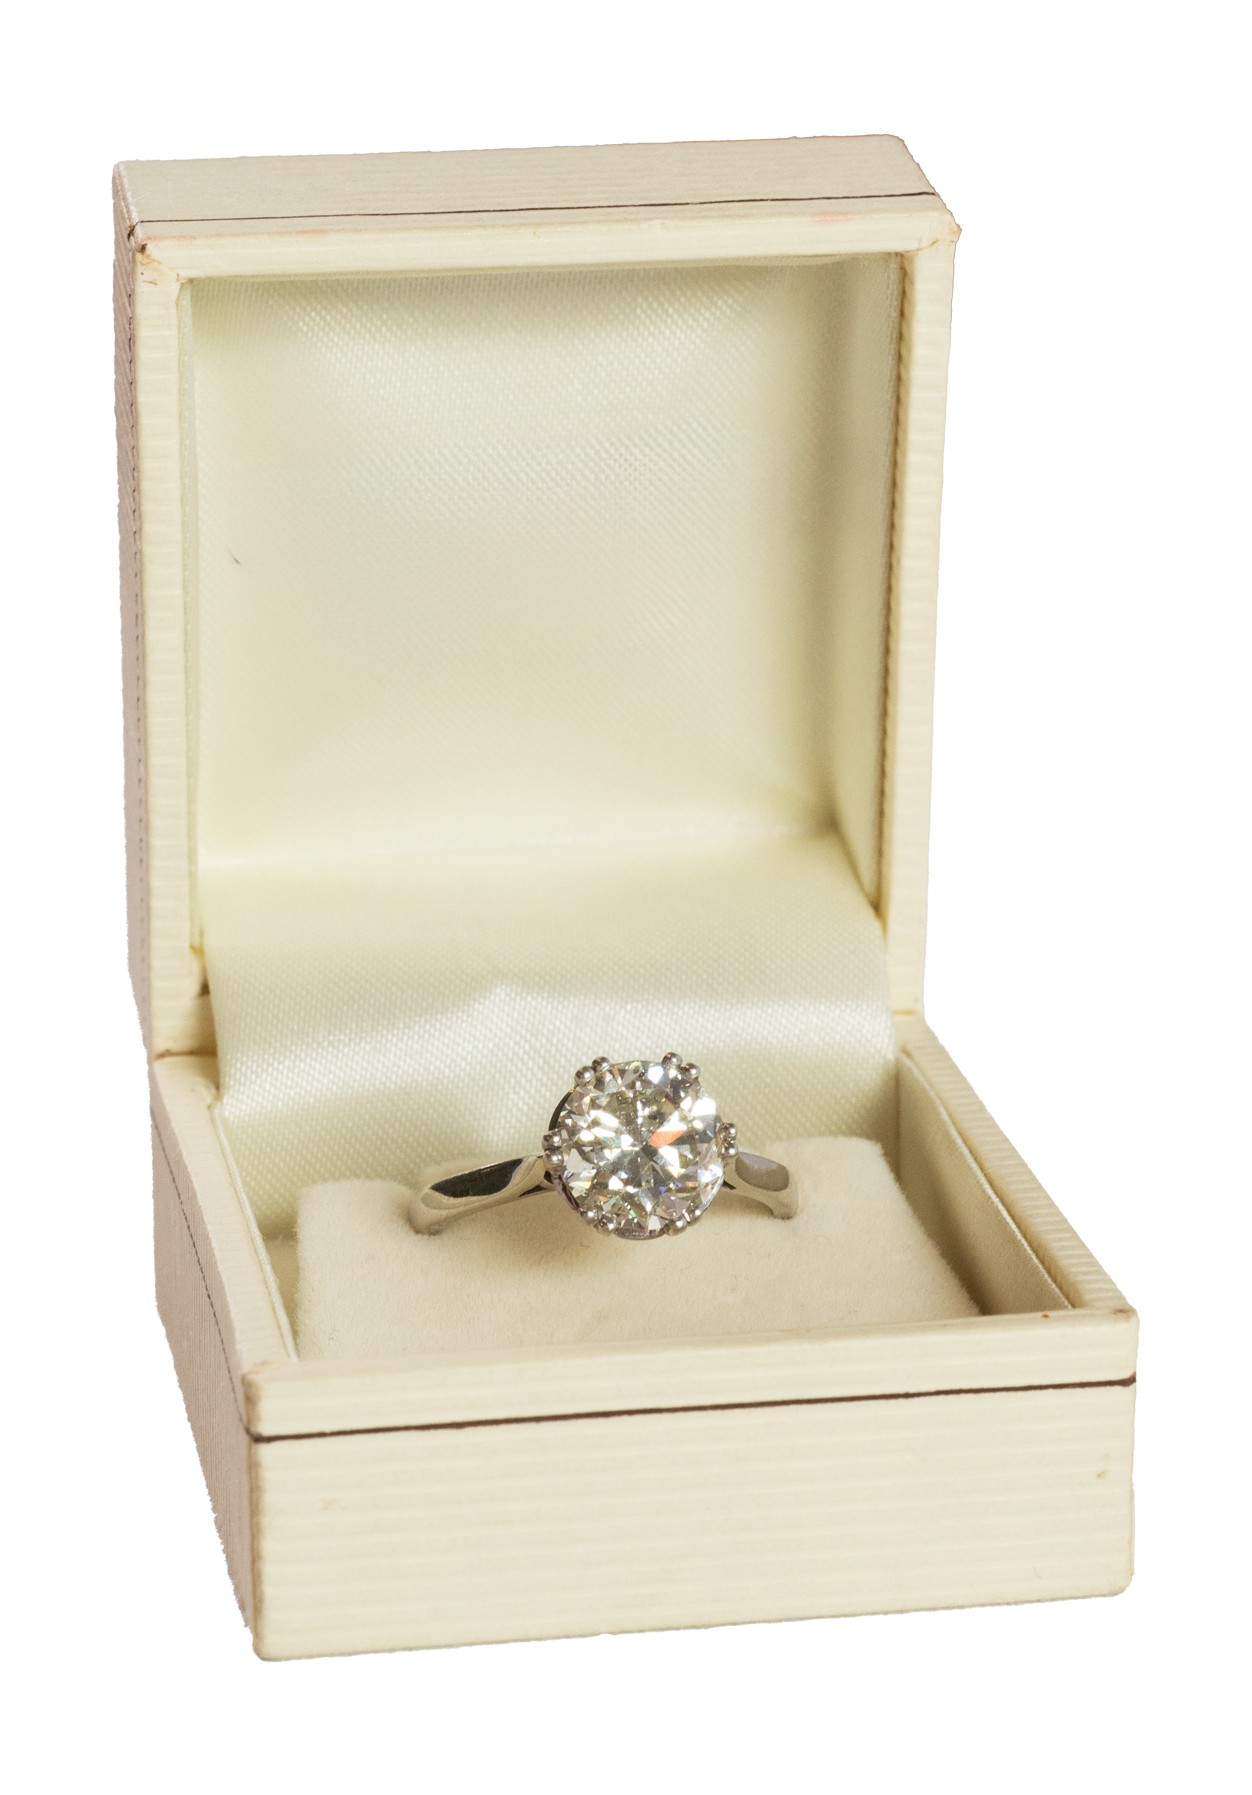 PLATINUM RING WITH A SOLITAIRE DIAMOND, approximately 3.22ct, round and brilliant cut, clarity